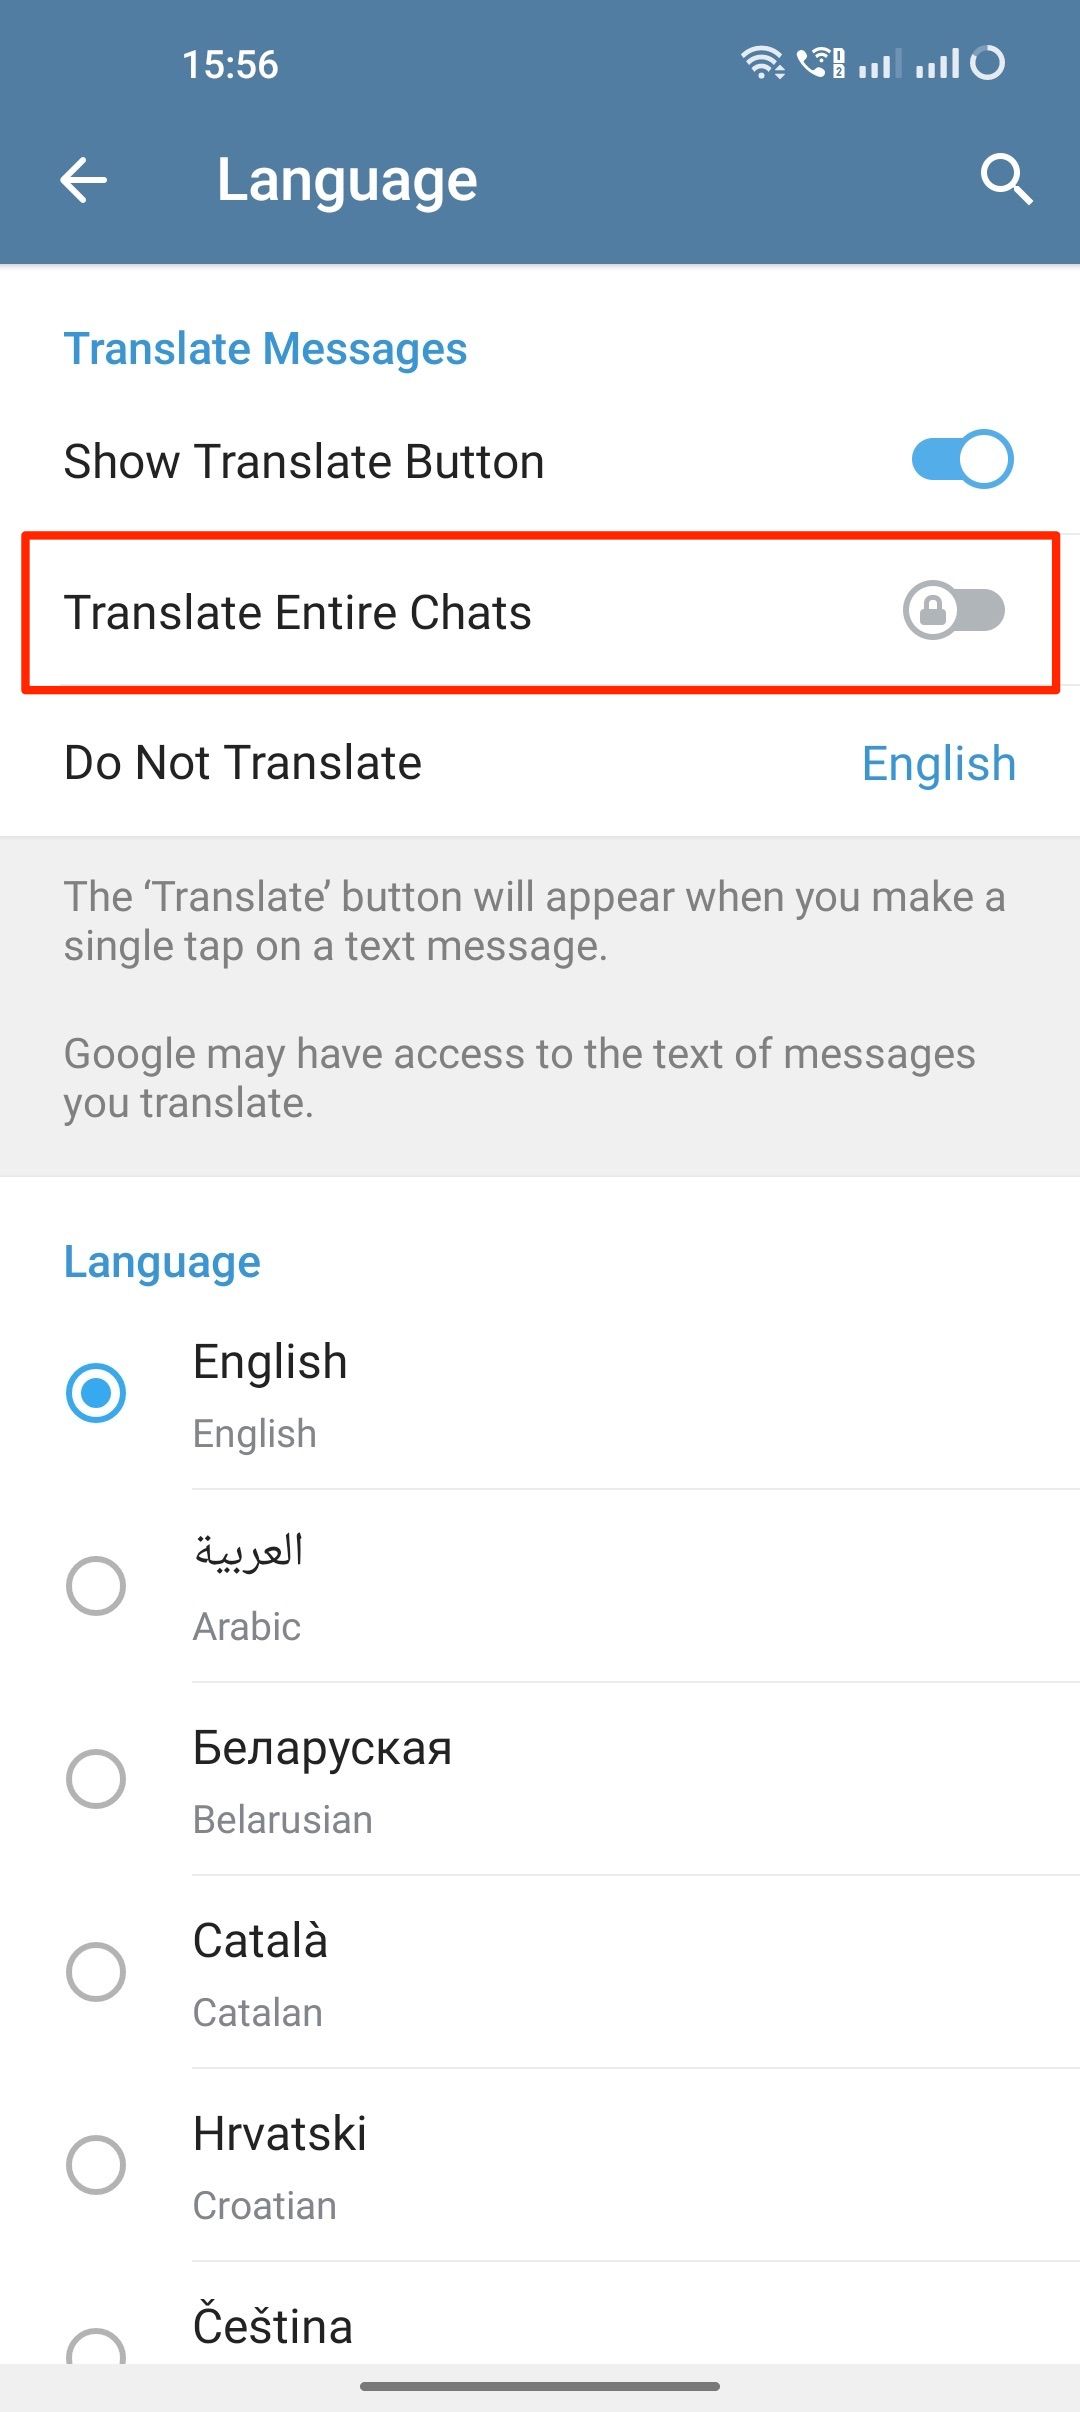 A screenshot of Telegram app's language setting with Translate Entire Chats highlighted